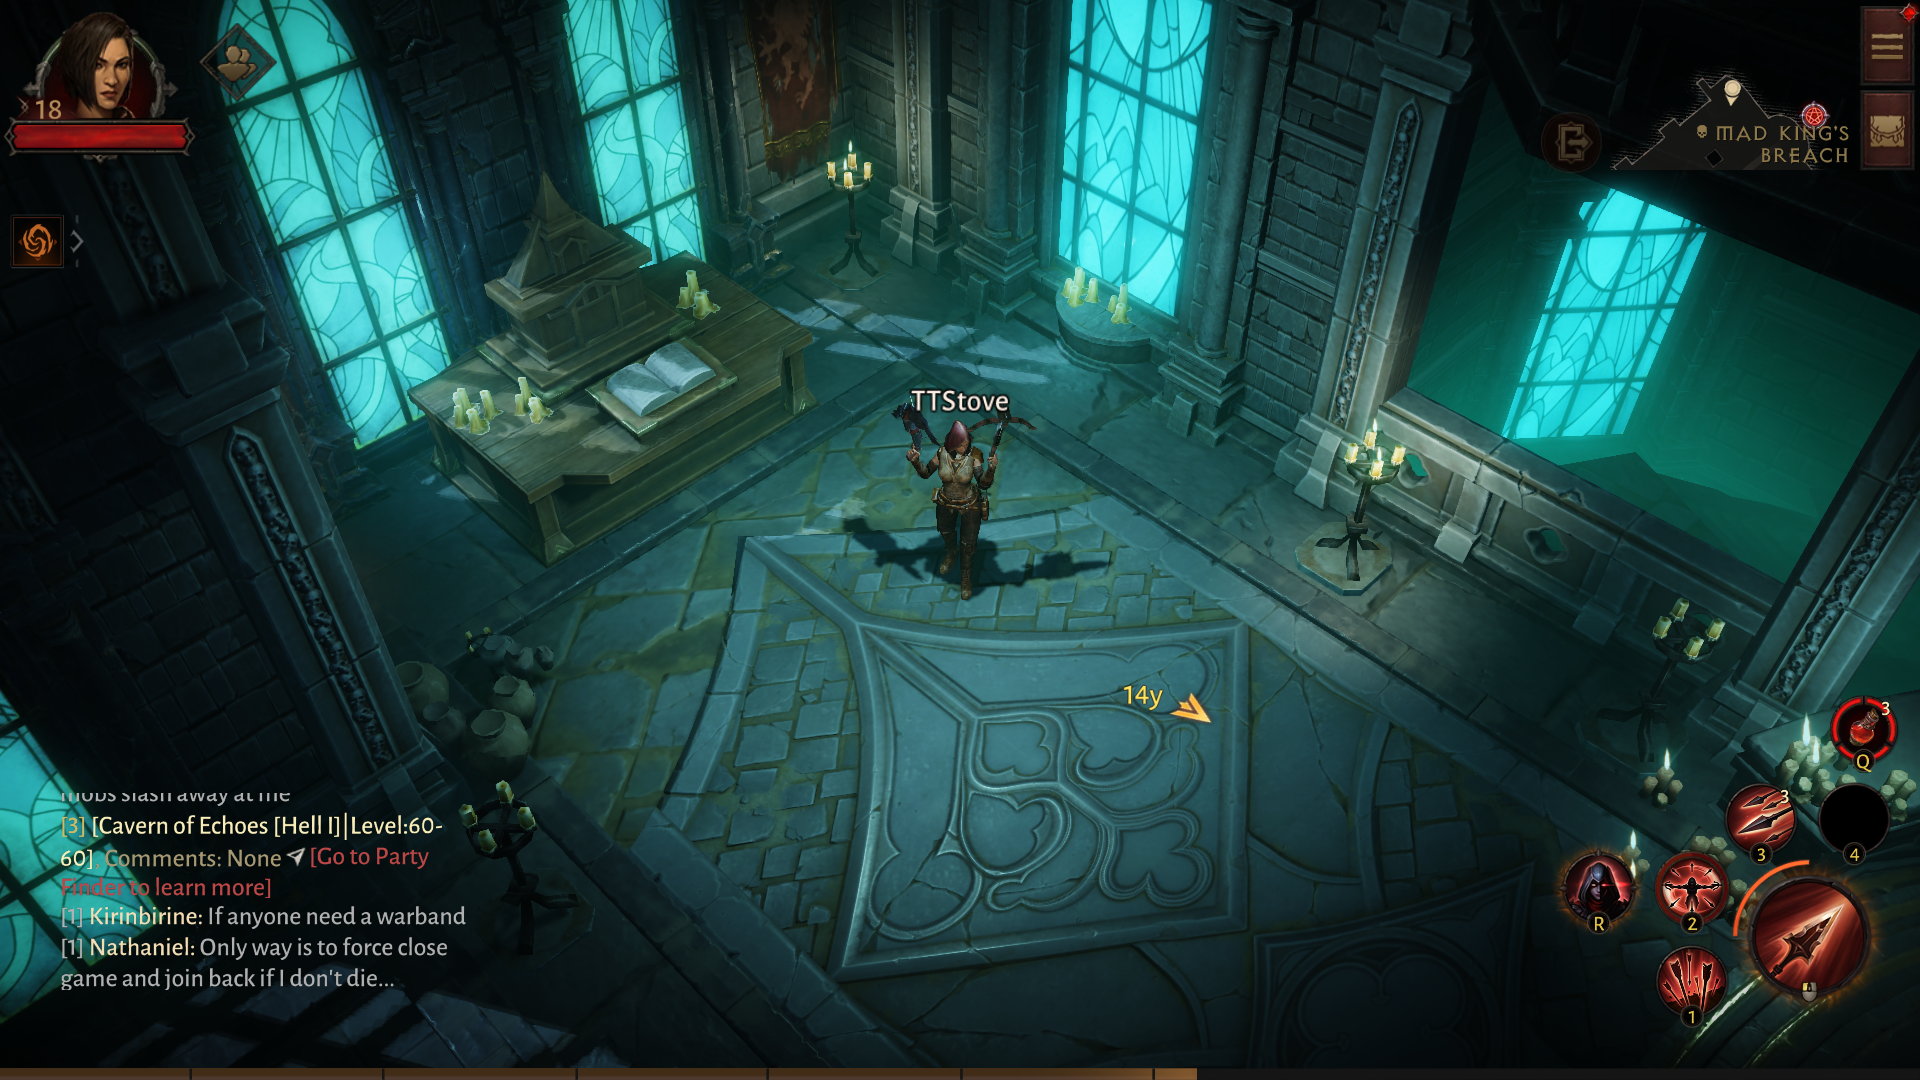 An archer stands within a castle study in Diablo Immortal, showing Very High graphics.